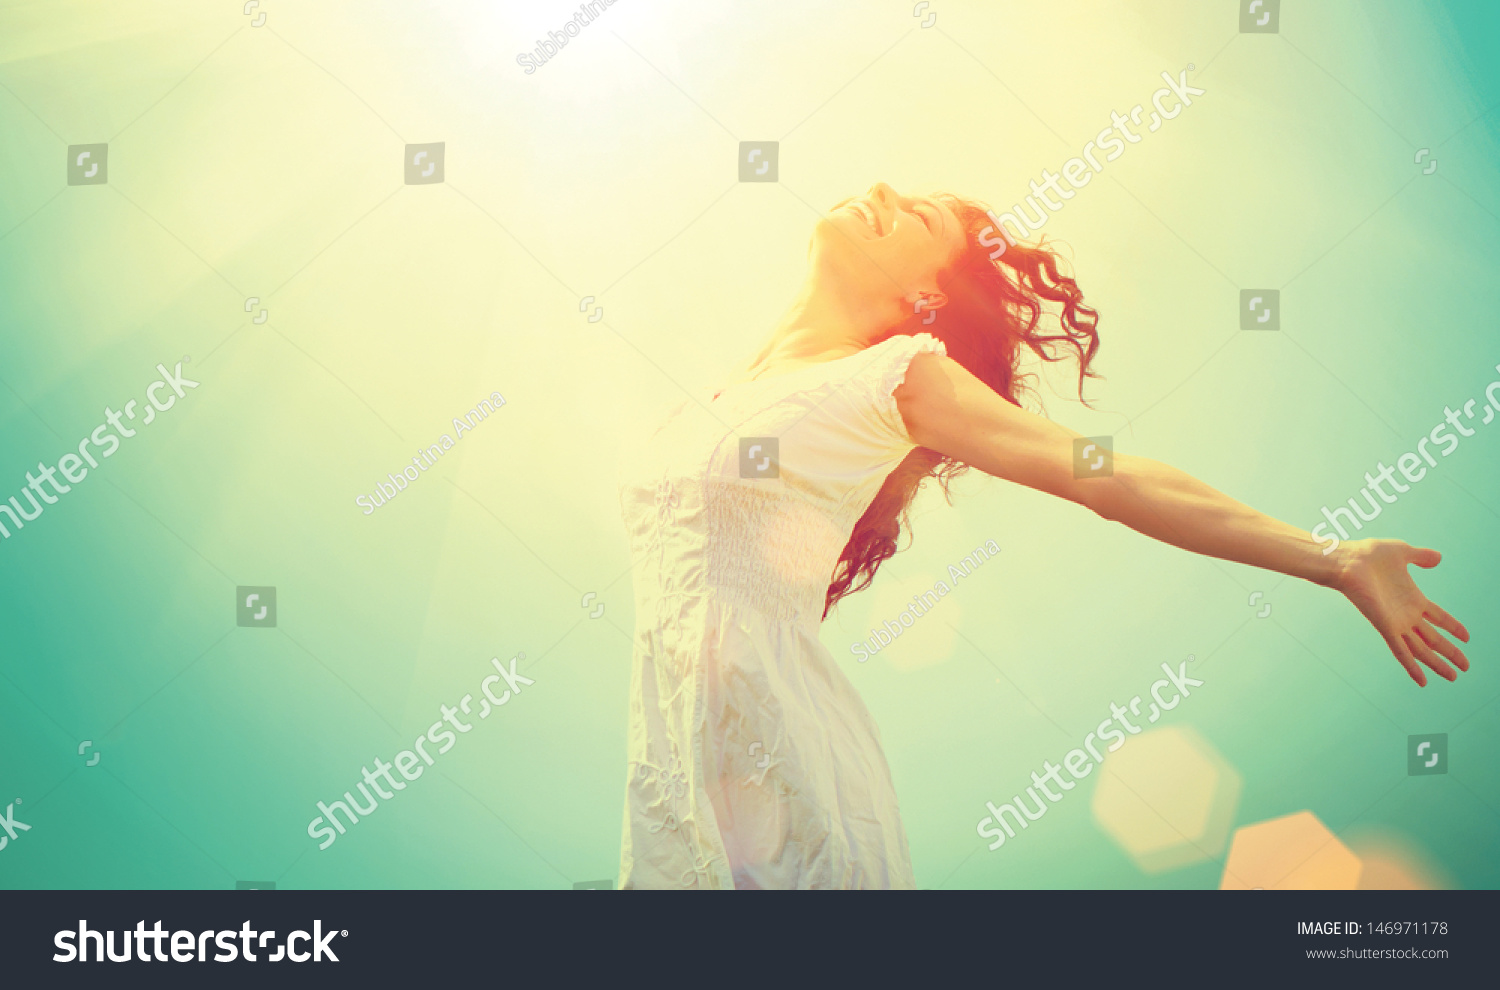 stock-photo-free-happy-woman-enjoying-nature-beauty-girl-outdoor-freedom-concept-beauty-girl-over-sky-and-146971178.jpg